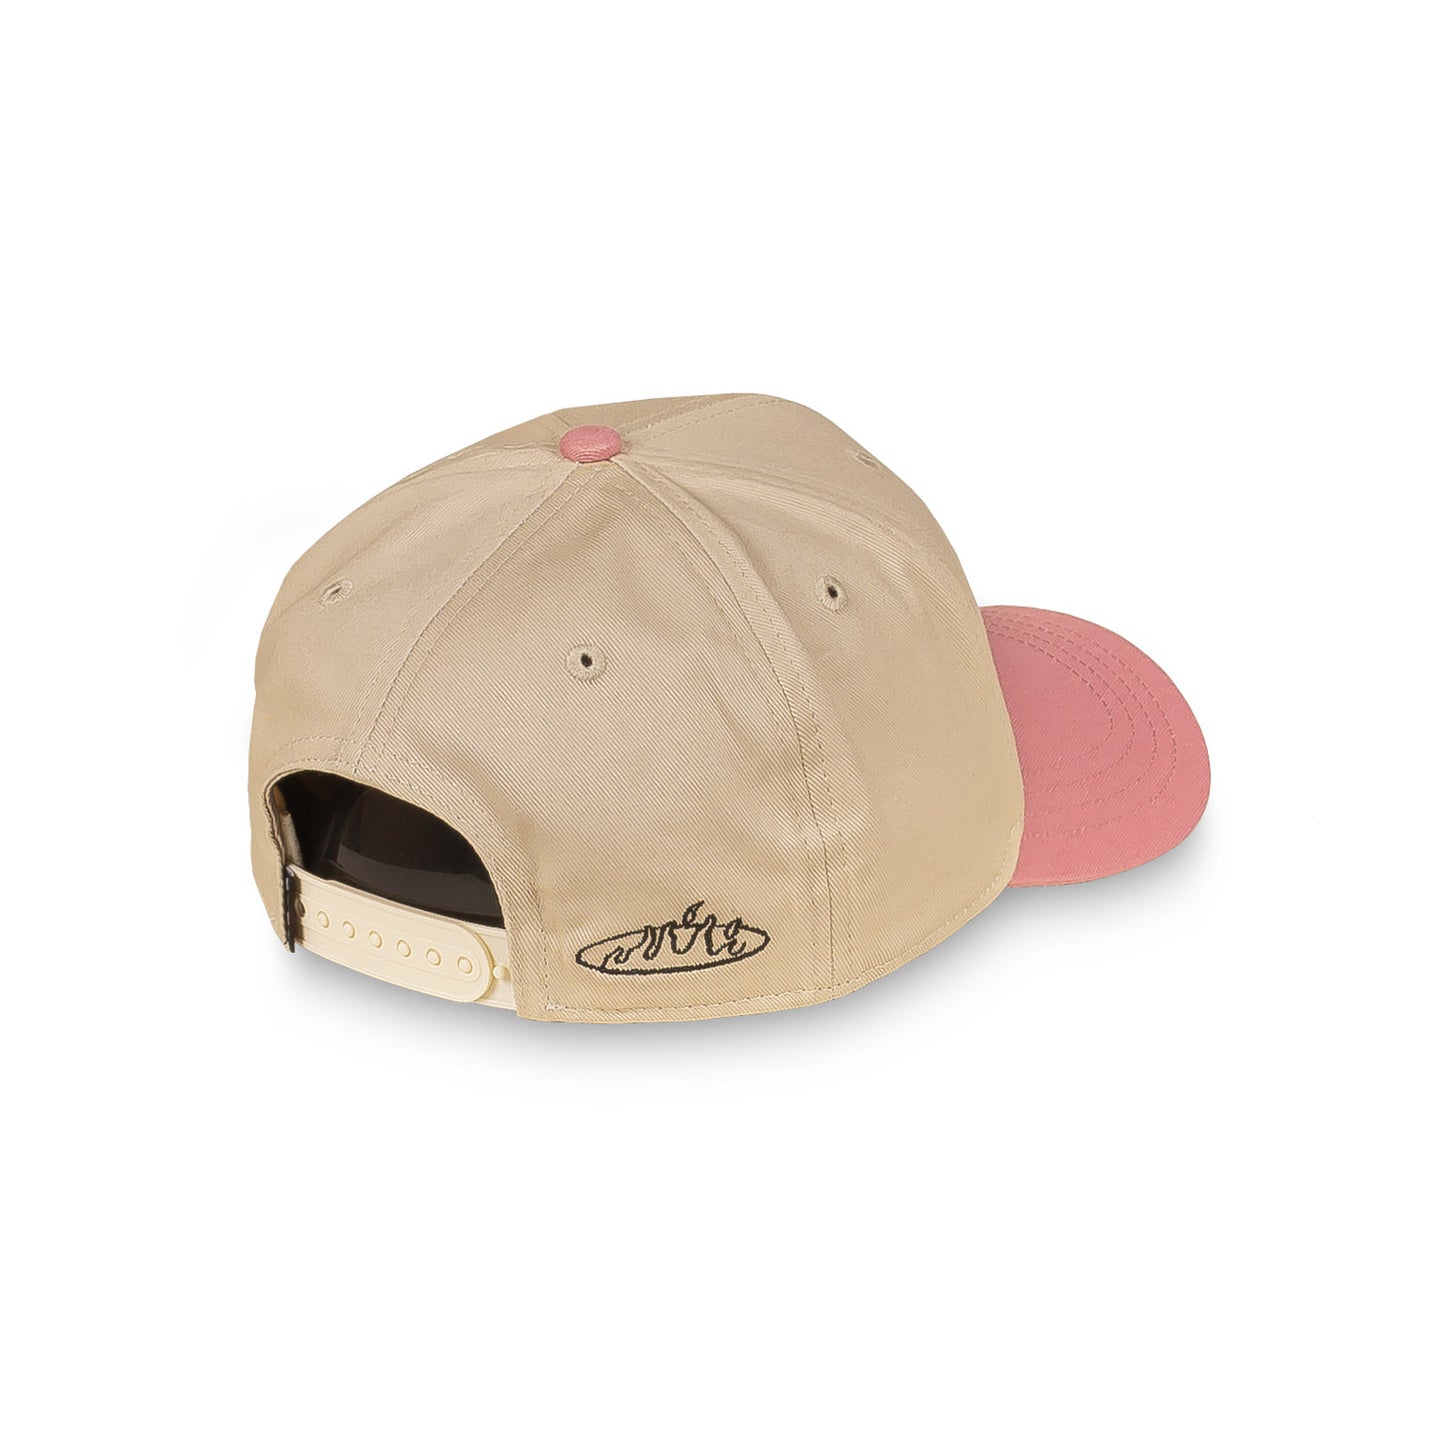 MELTED STONE BICOLOR CURVED VISOR SNAPBACK CAP CREAM